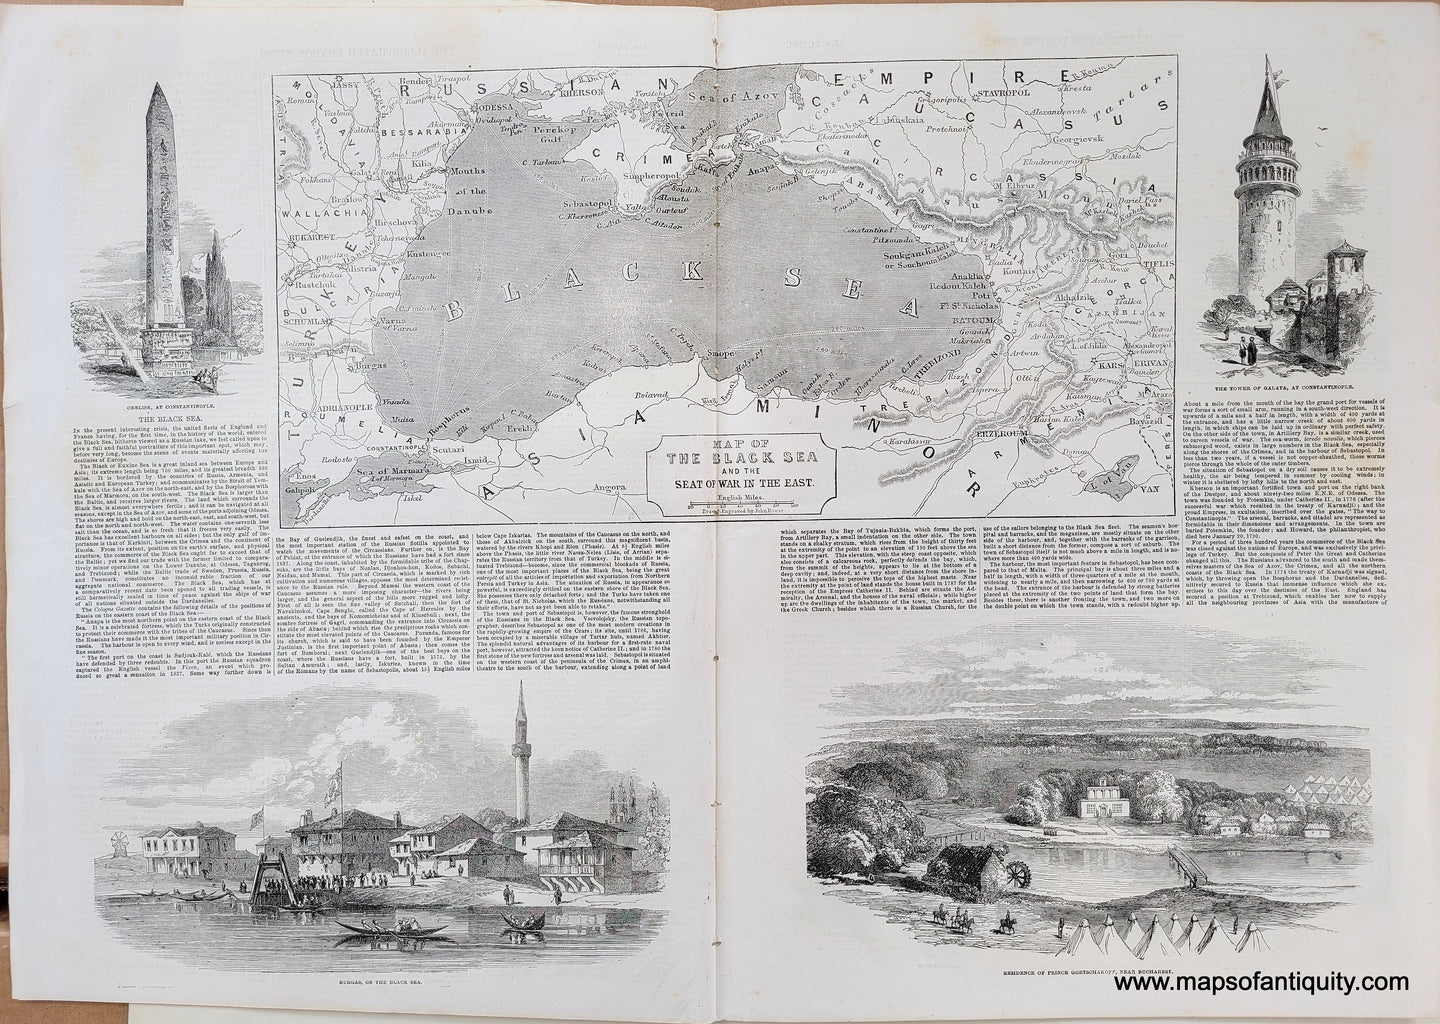 Genuine-Antique-Map-Map-of-the-Black-Sea-and-the-Seat-of-War-in-the-East-Military-Russia--1854-Illustrated-London-News-Maps-Of-Antiquity-1800s-19th-century